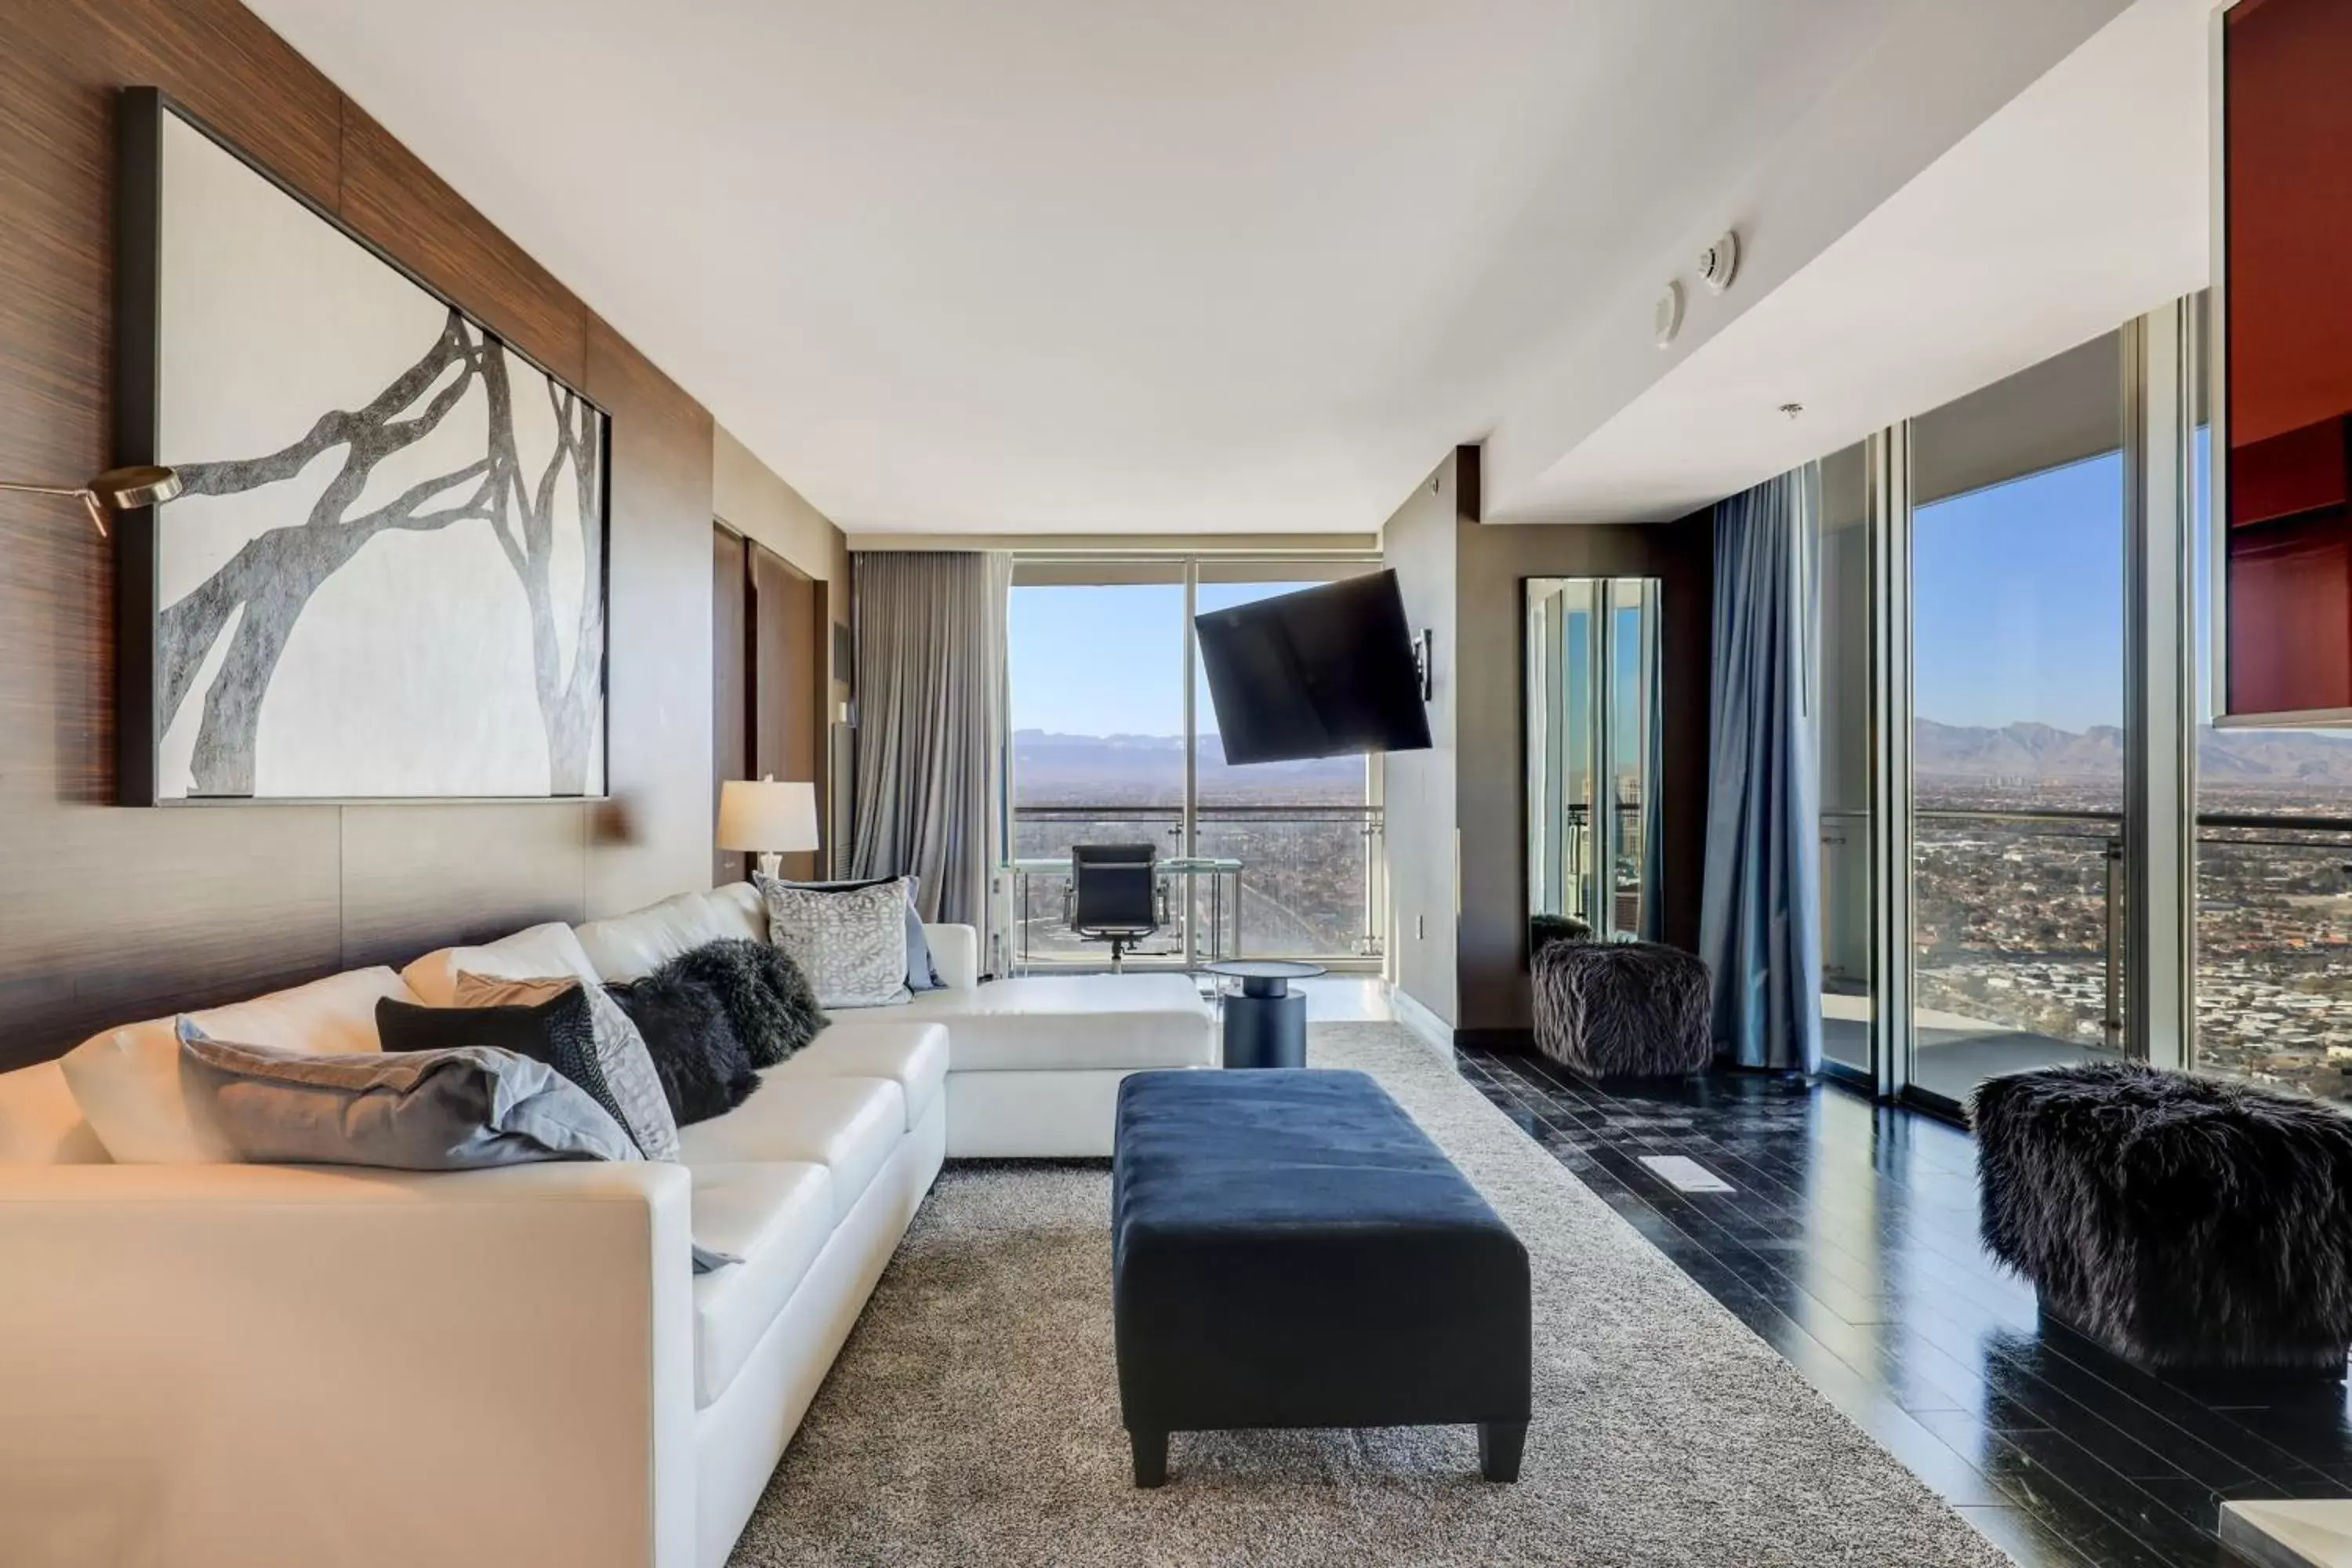 TV and multimedia, Seating Area in Vegas Palms HIGH 52nd fl. 1BDR corner penthouse 1220sqft